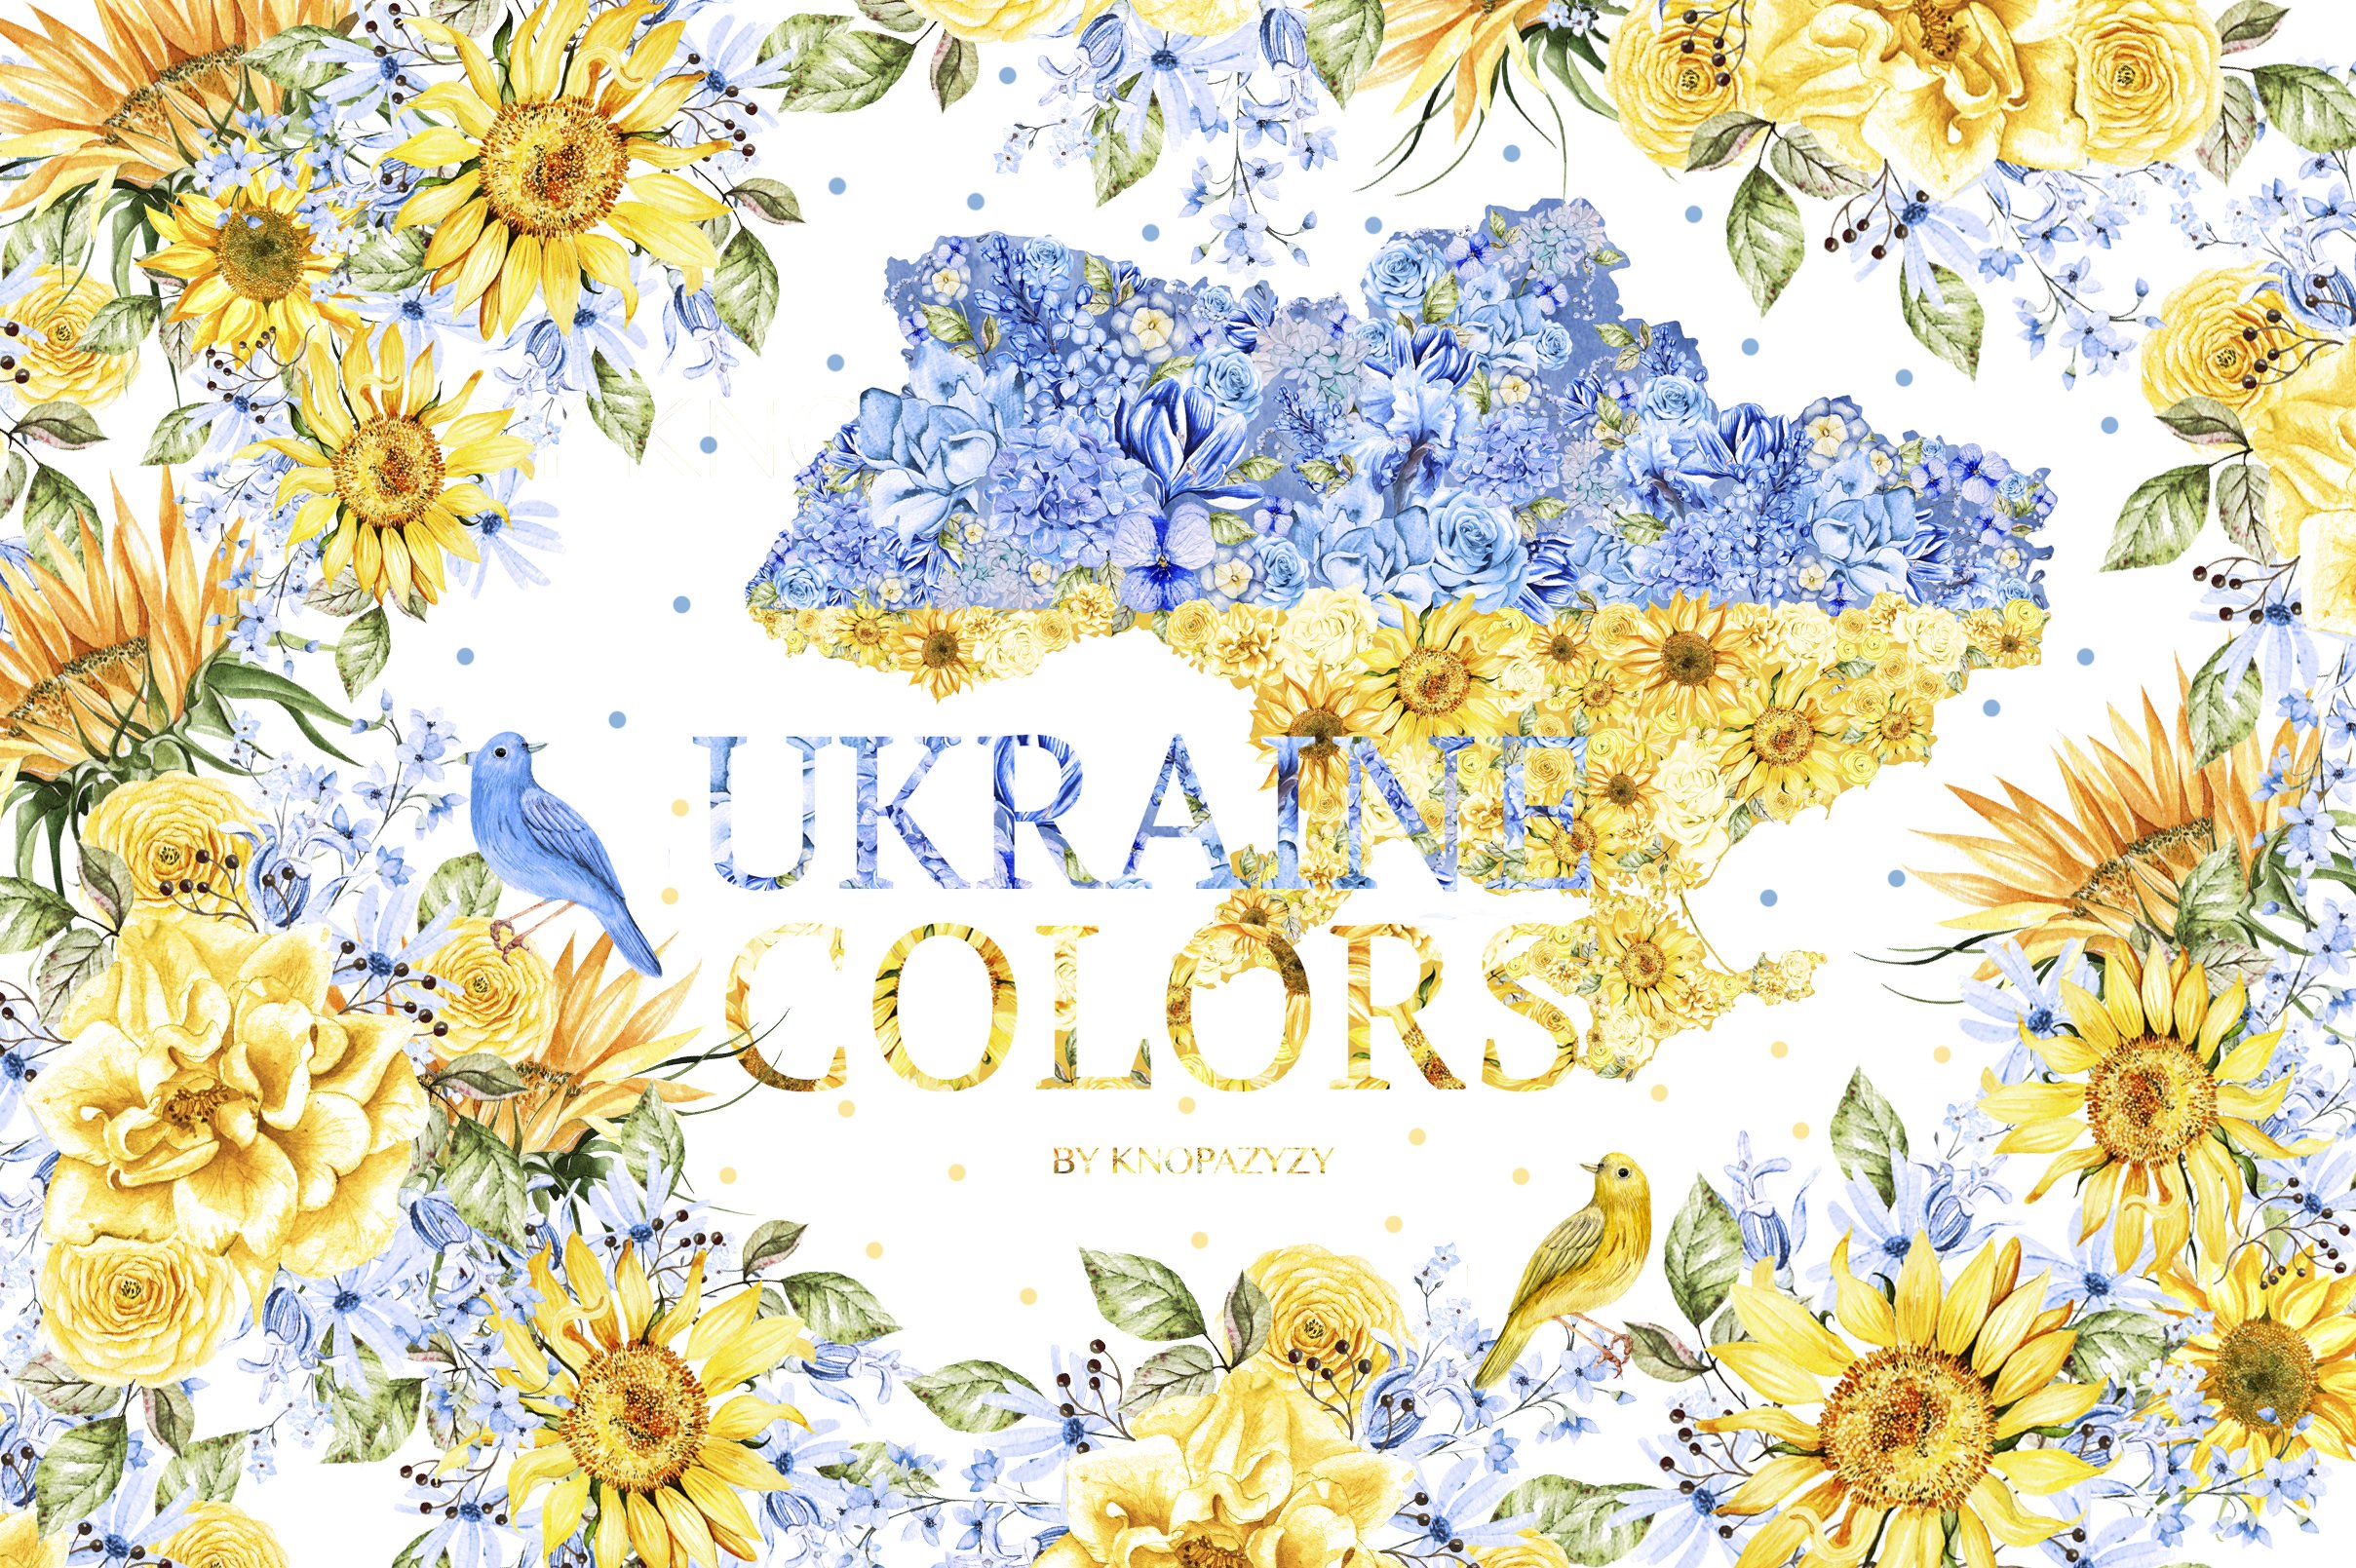 UKRAINE COLORS in watercolor cover image.